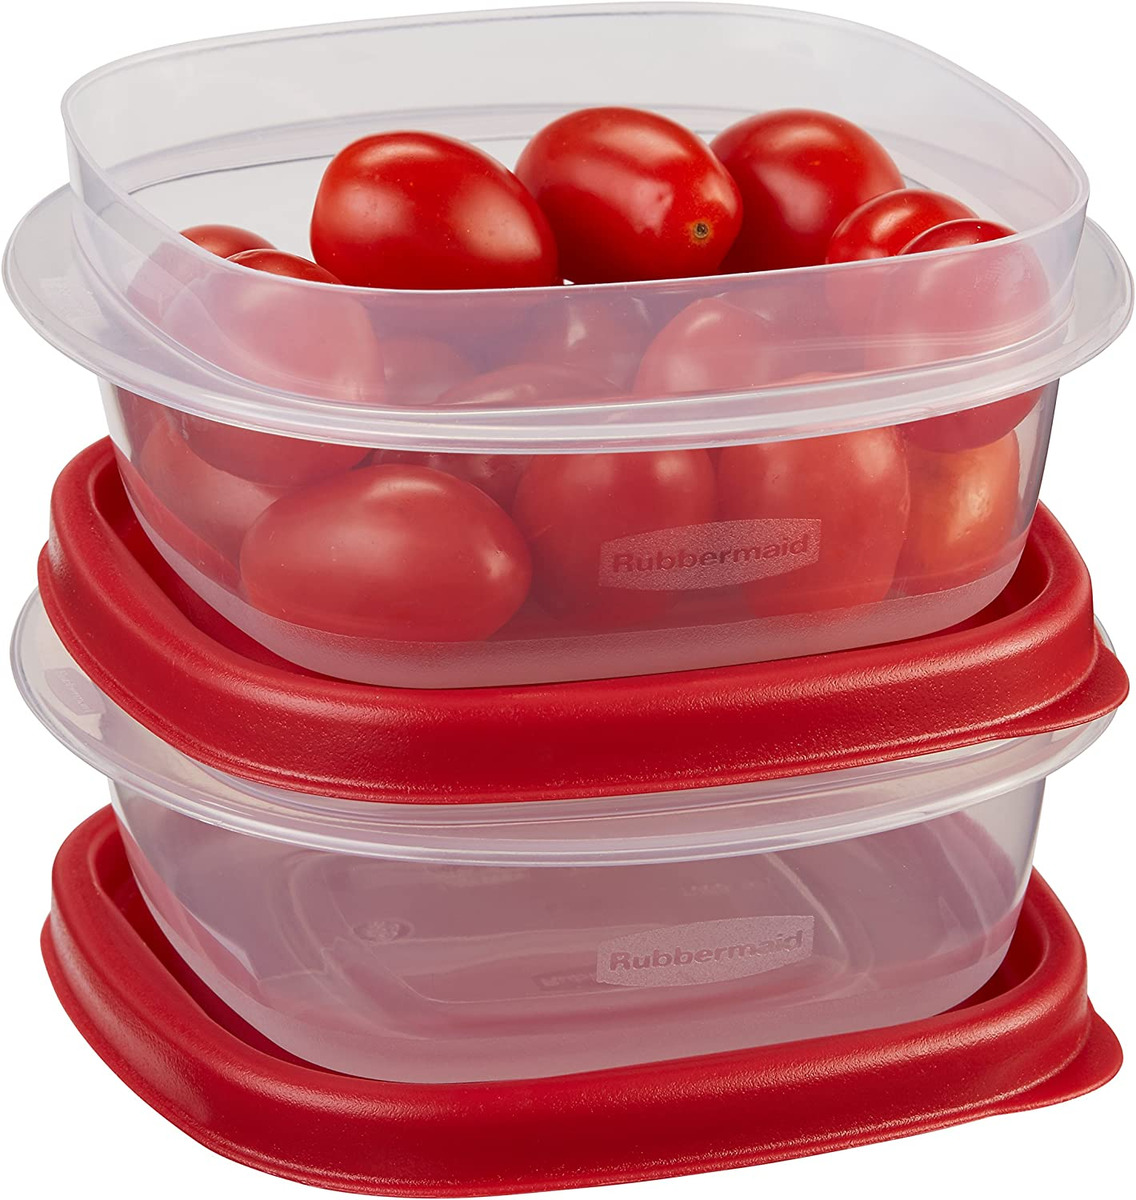 Rubbermaid Easy Find Lids Food Storage Container, 9 Cup, Racer Red